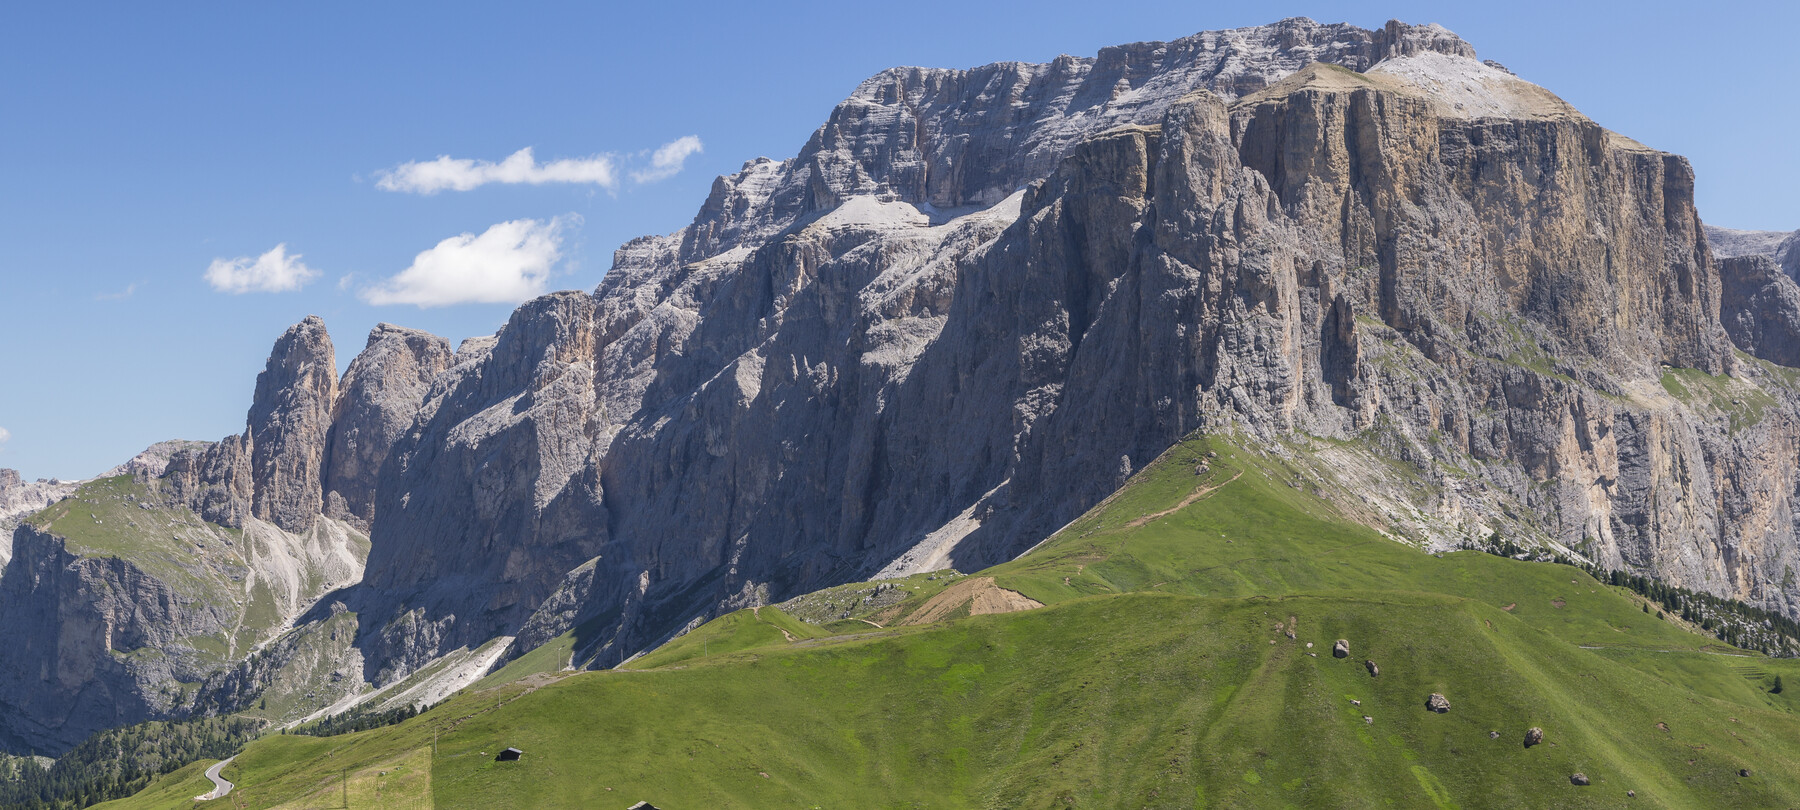 How were the Dolomites formed?